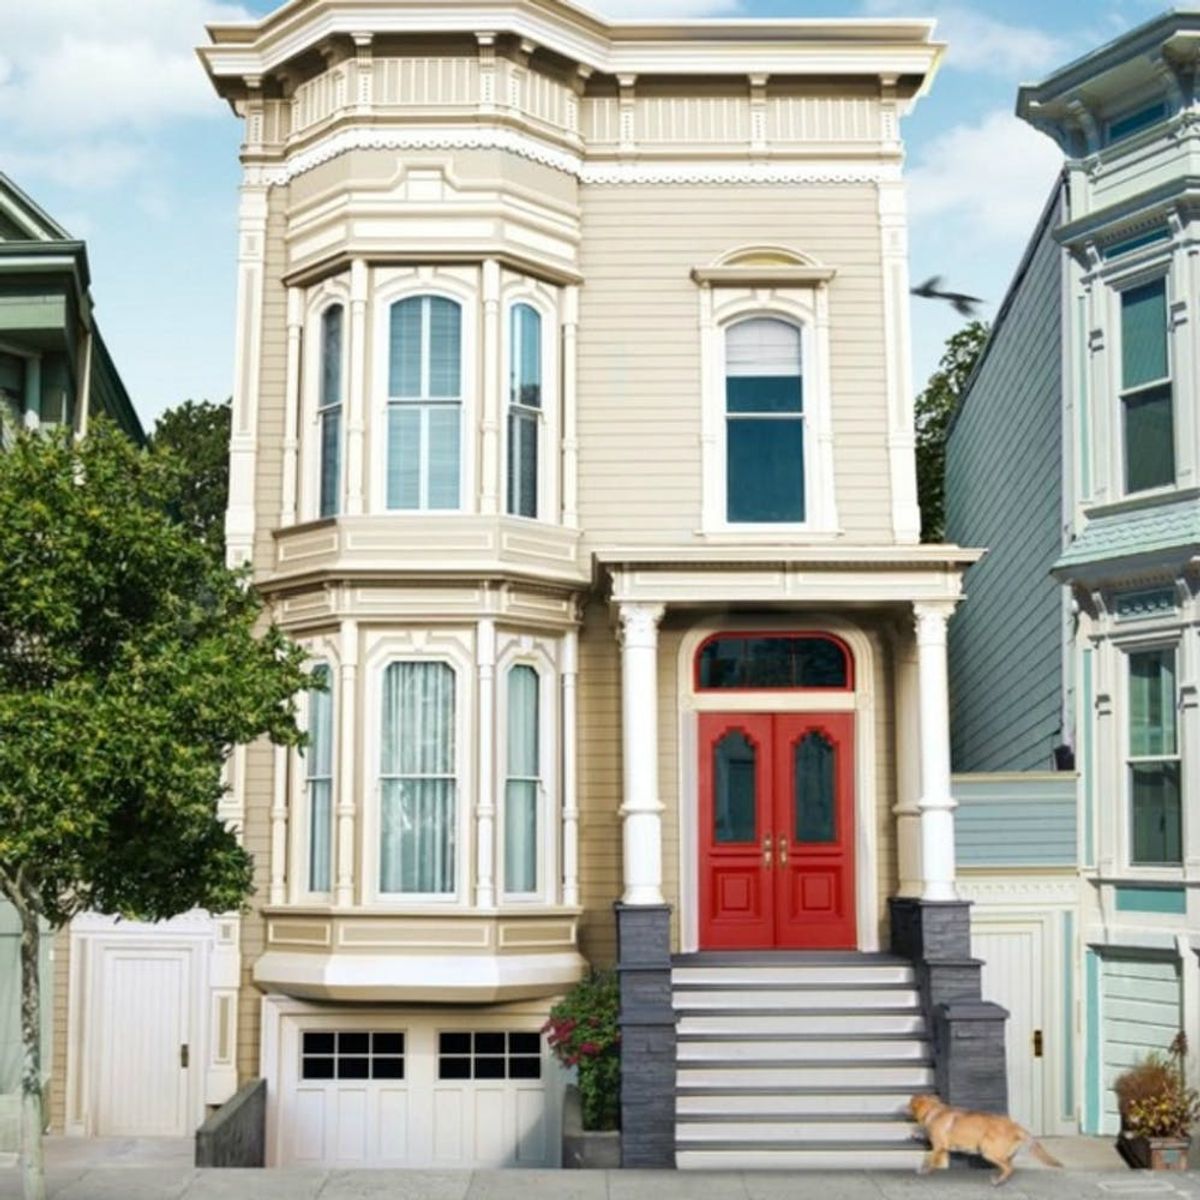 This Is How Much It Will Cost You to Own the Original Full House Home